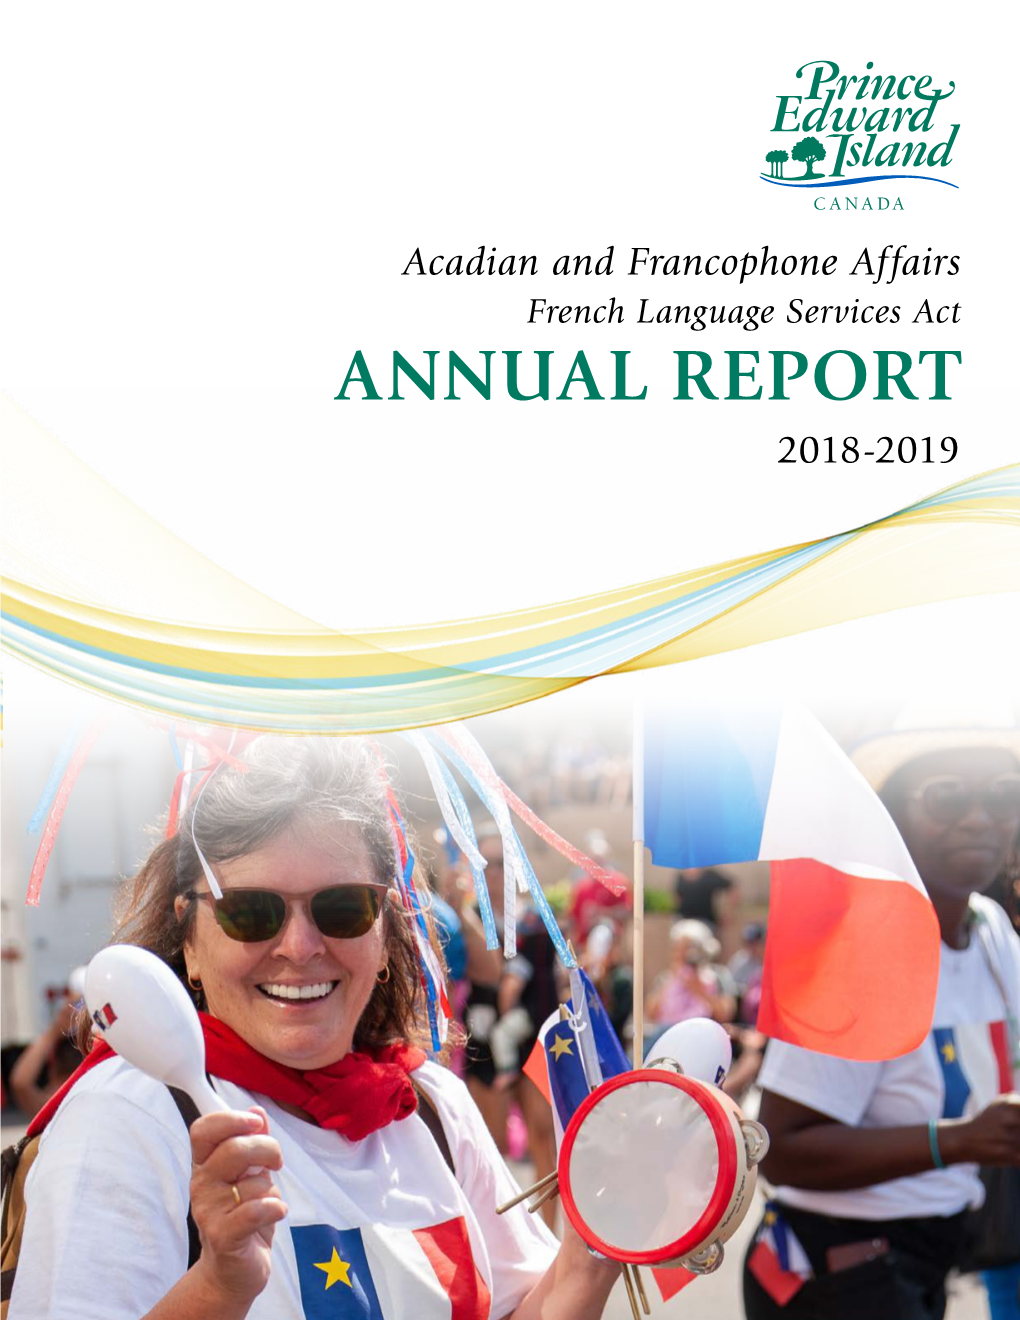 French Language Services Act Annual Report